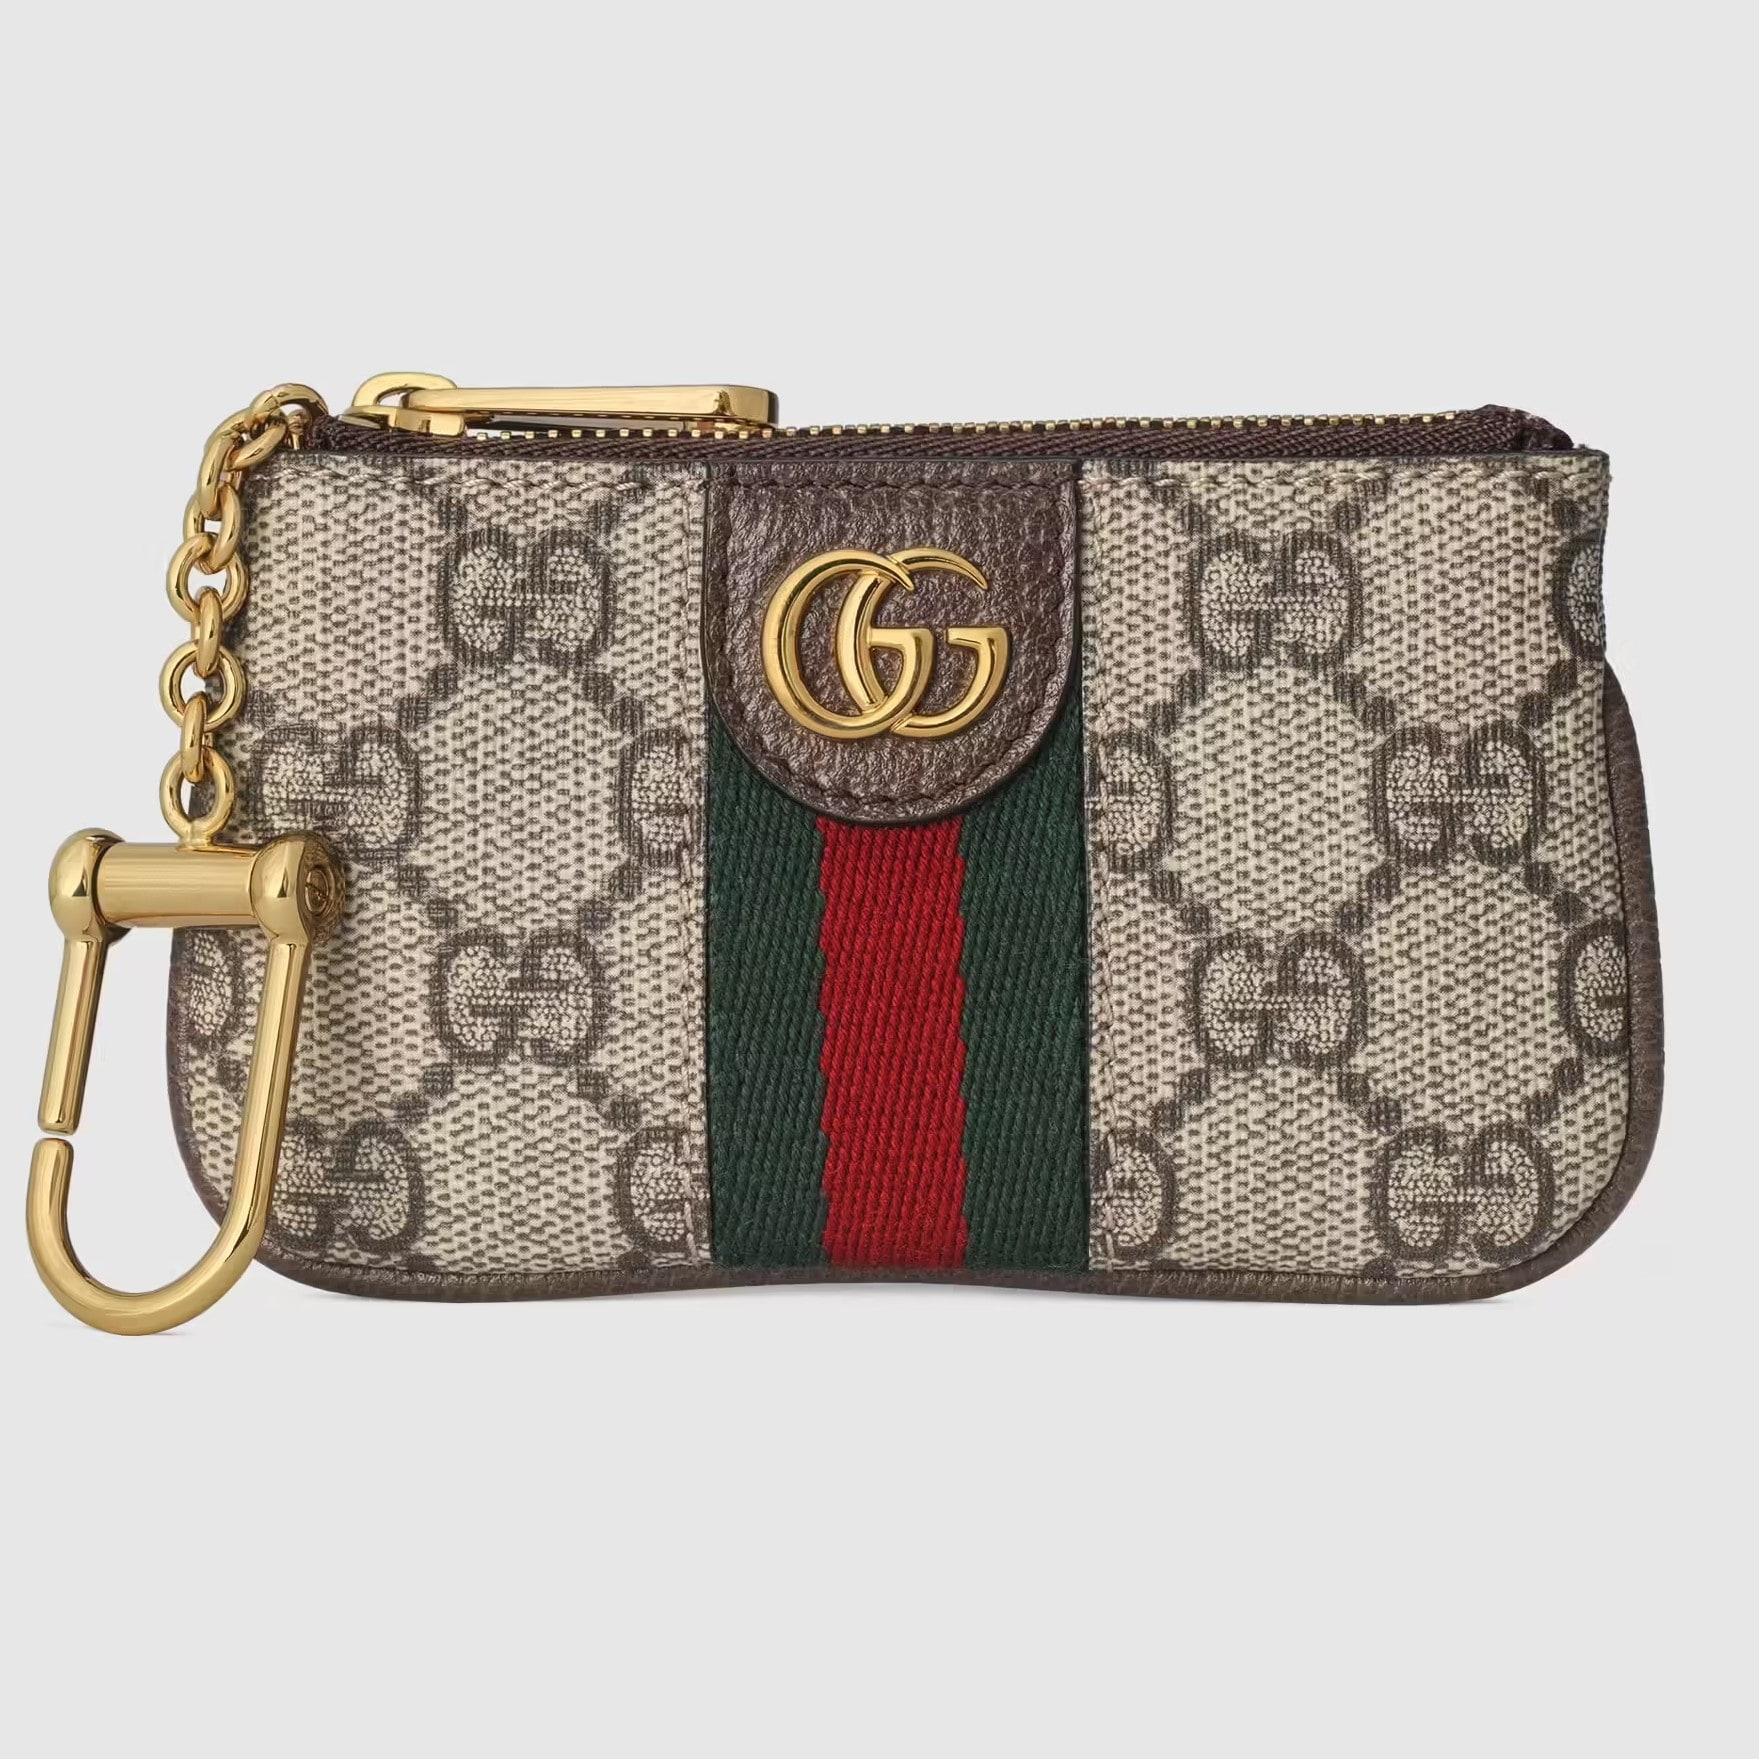 VÍ NỮ GUCCI MINI LIGHT OPHIDIA KEY CASE IN BEIGE AND EBONY GG SUPREME CANVAS 5